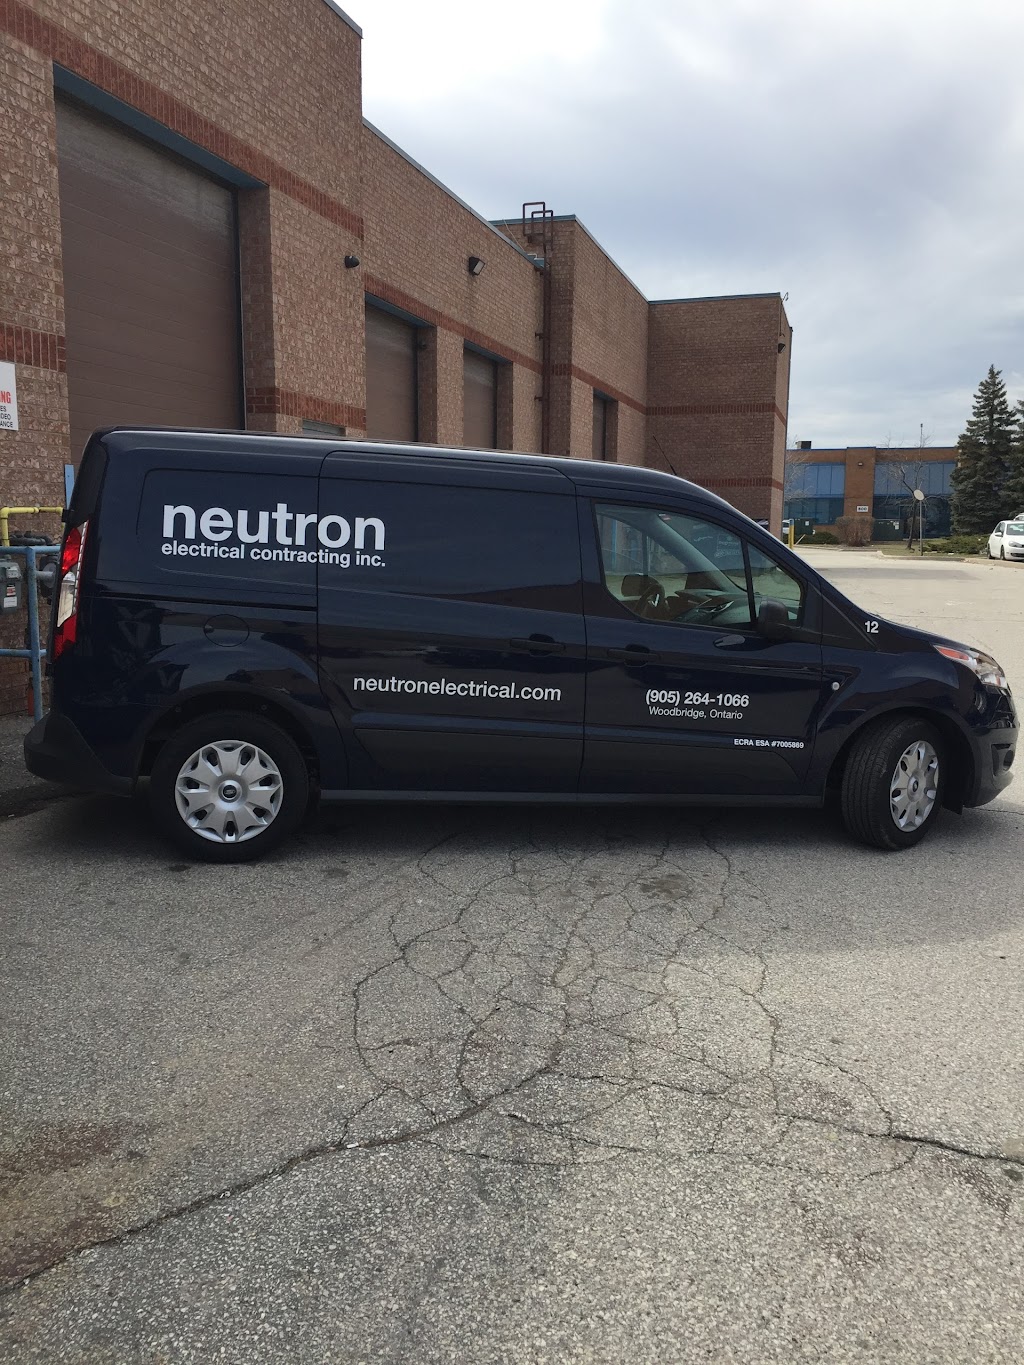 Neutron Electrical Contracting Inc. | 290 Vaughan Valley Blvd, Woodbridge, ON L4H 3C3, Canada | Phone: (905) 264-1066